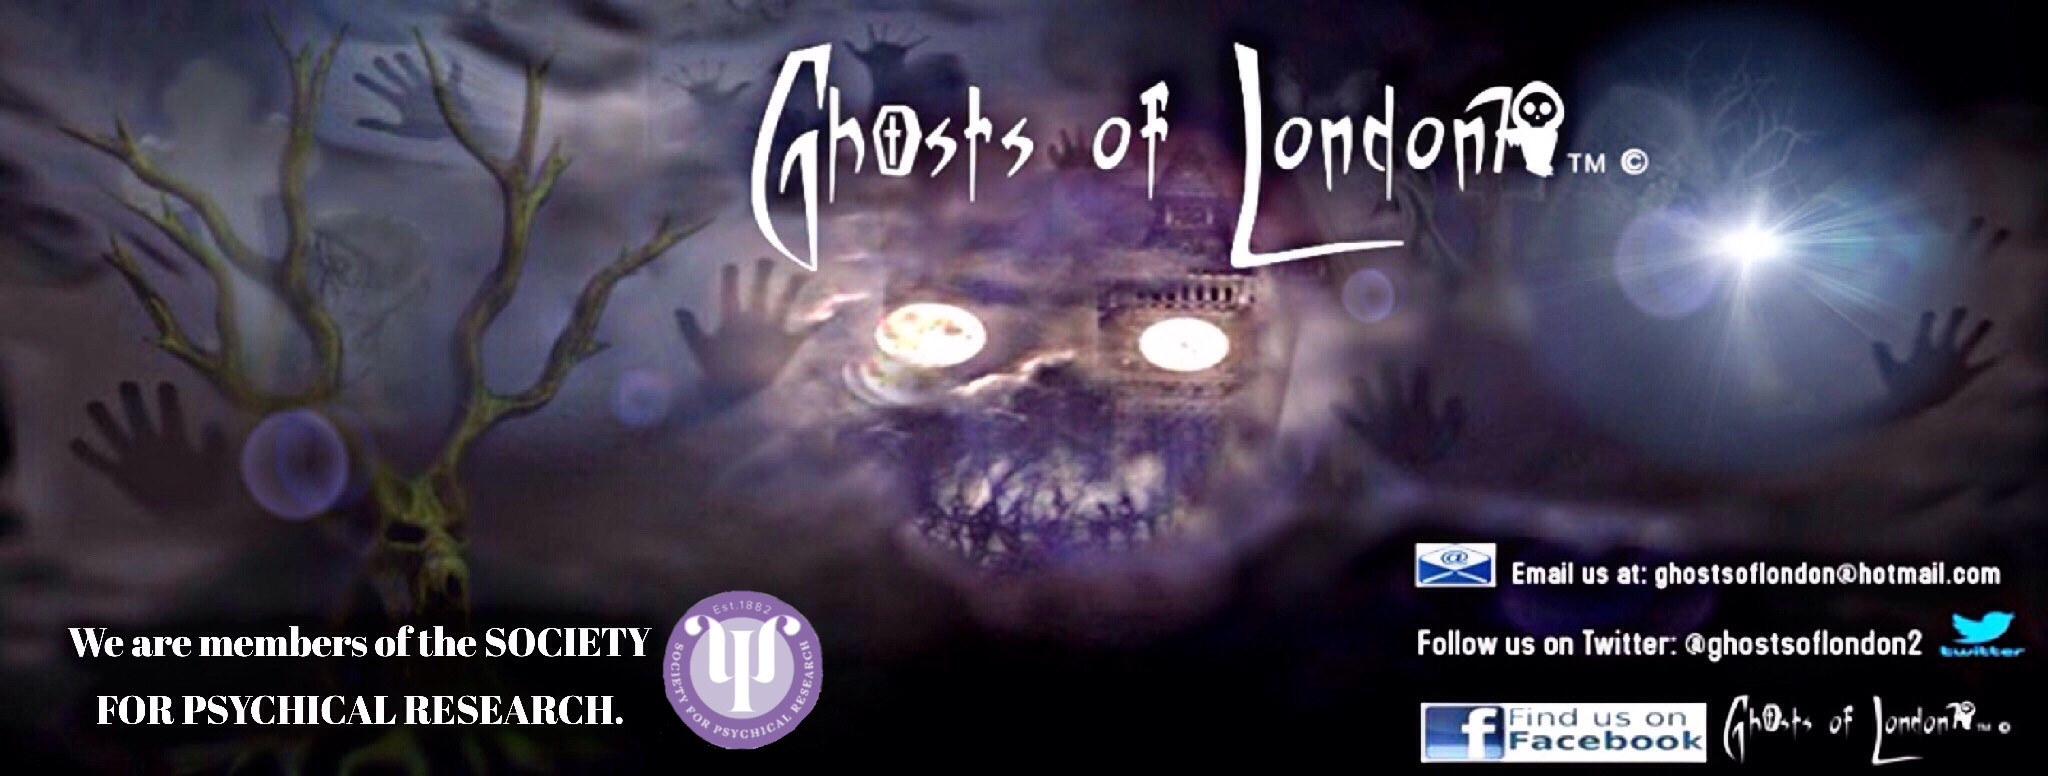 Welcome to Ghosts of London, We are paranormal researchers and we are here to help